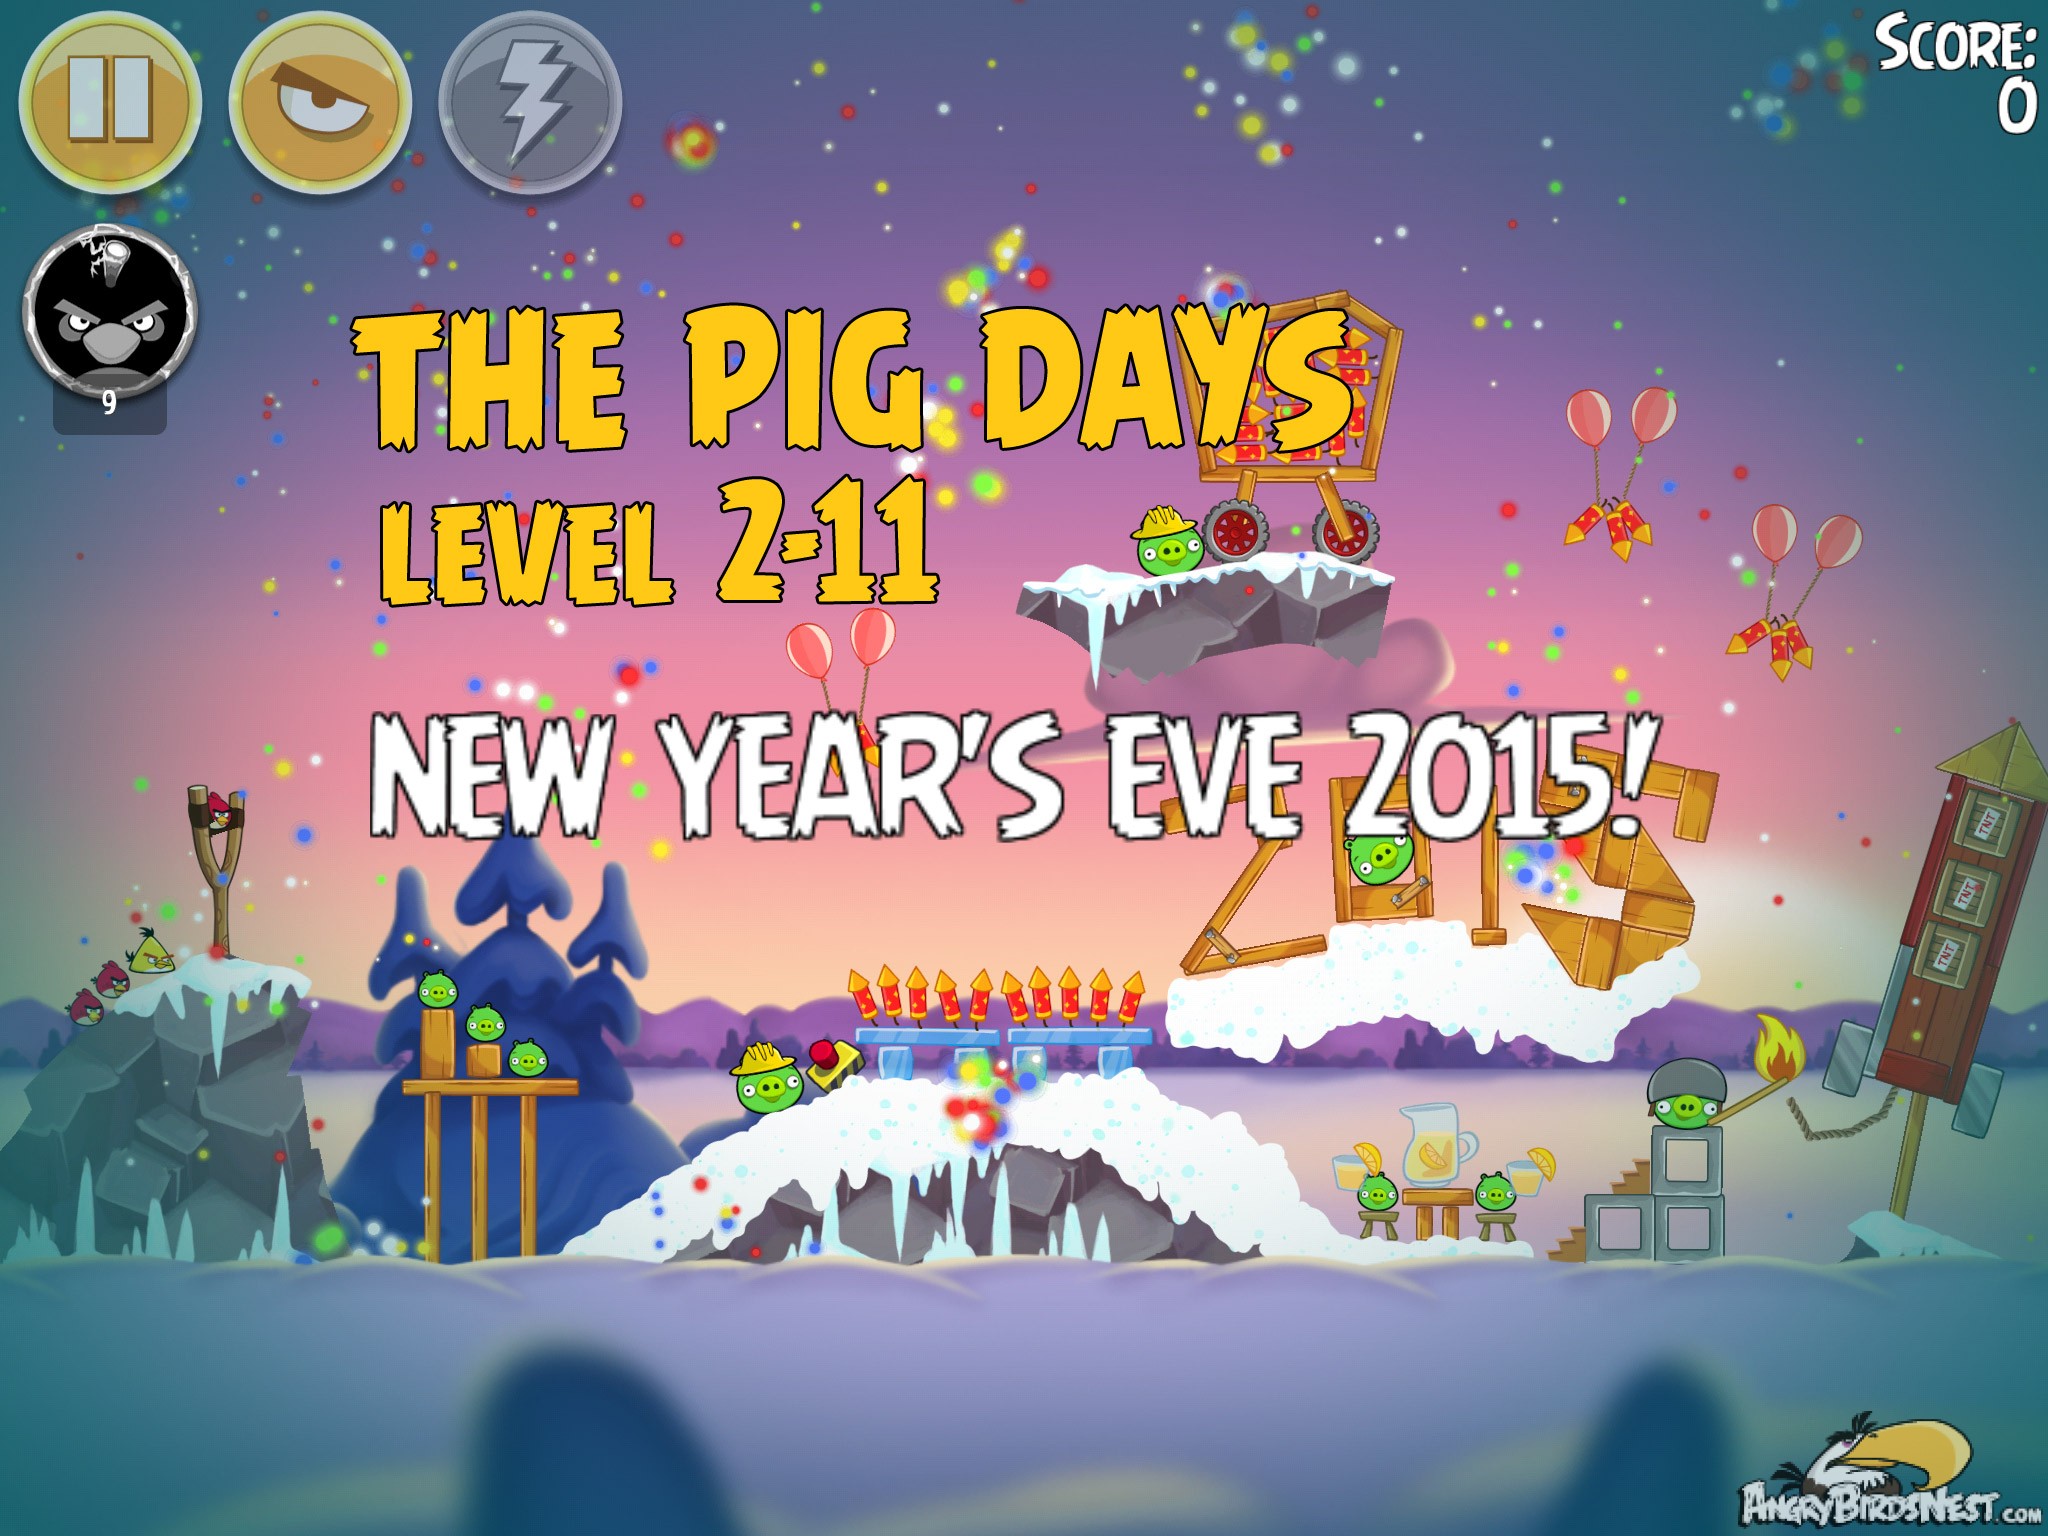 Angry Birds Seasons The Pig Days 2-11